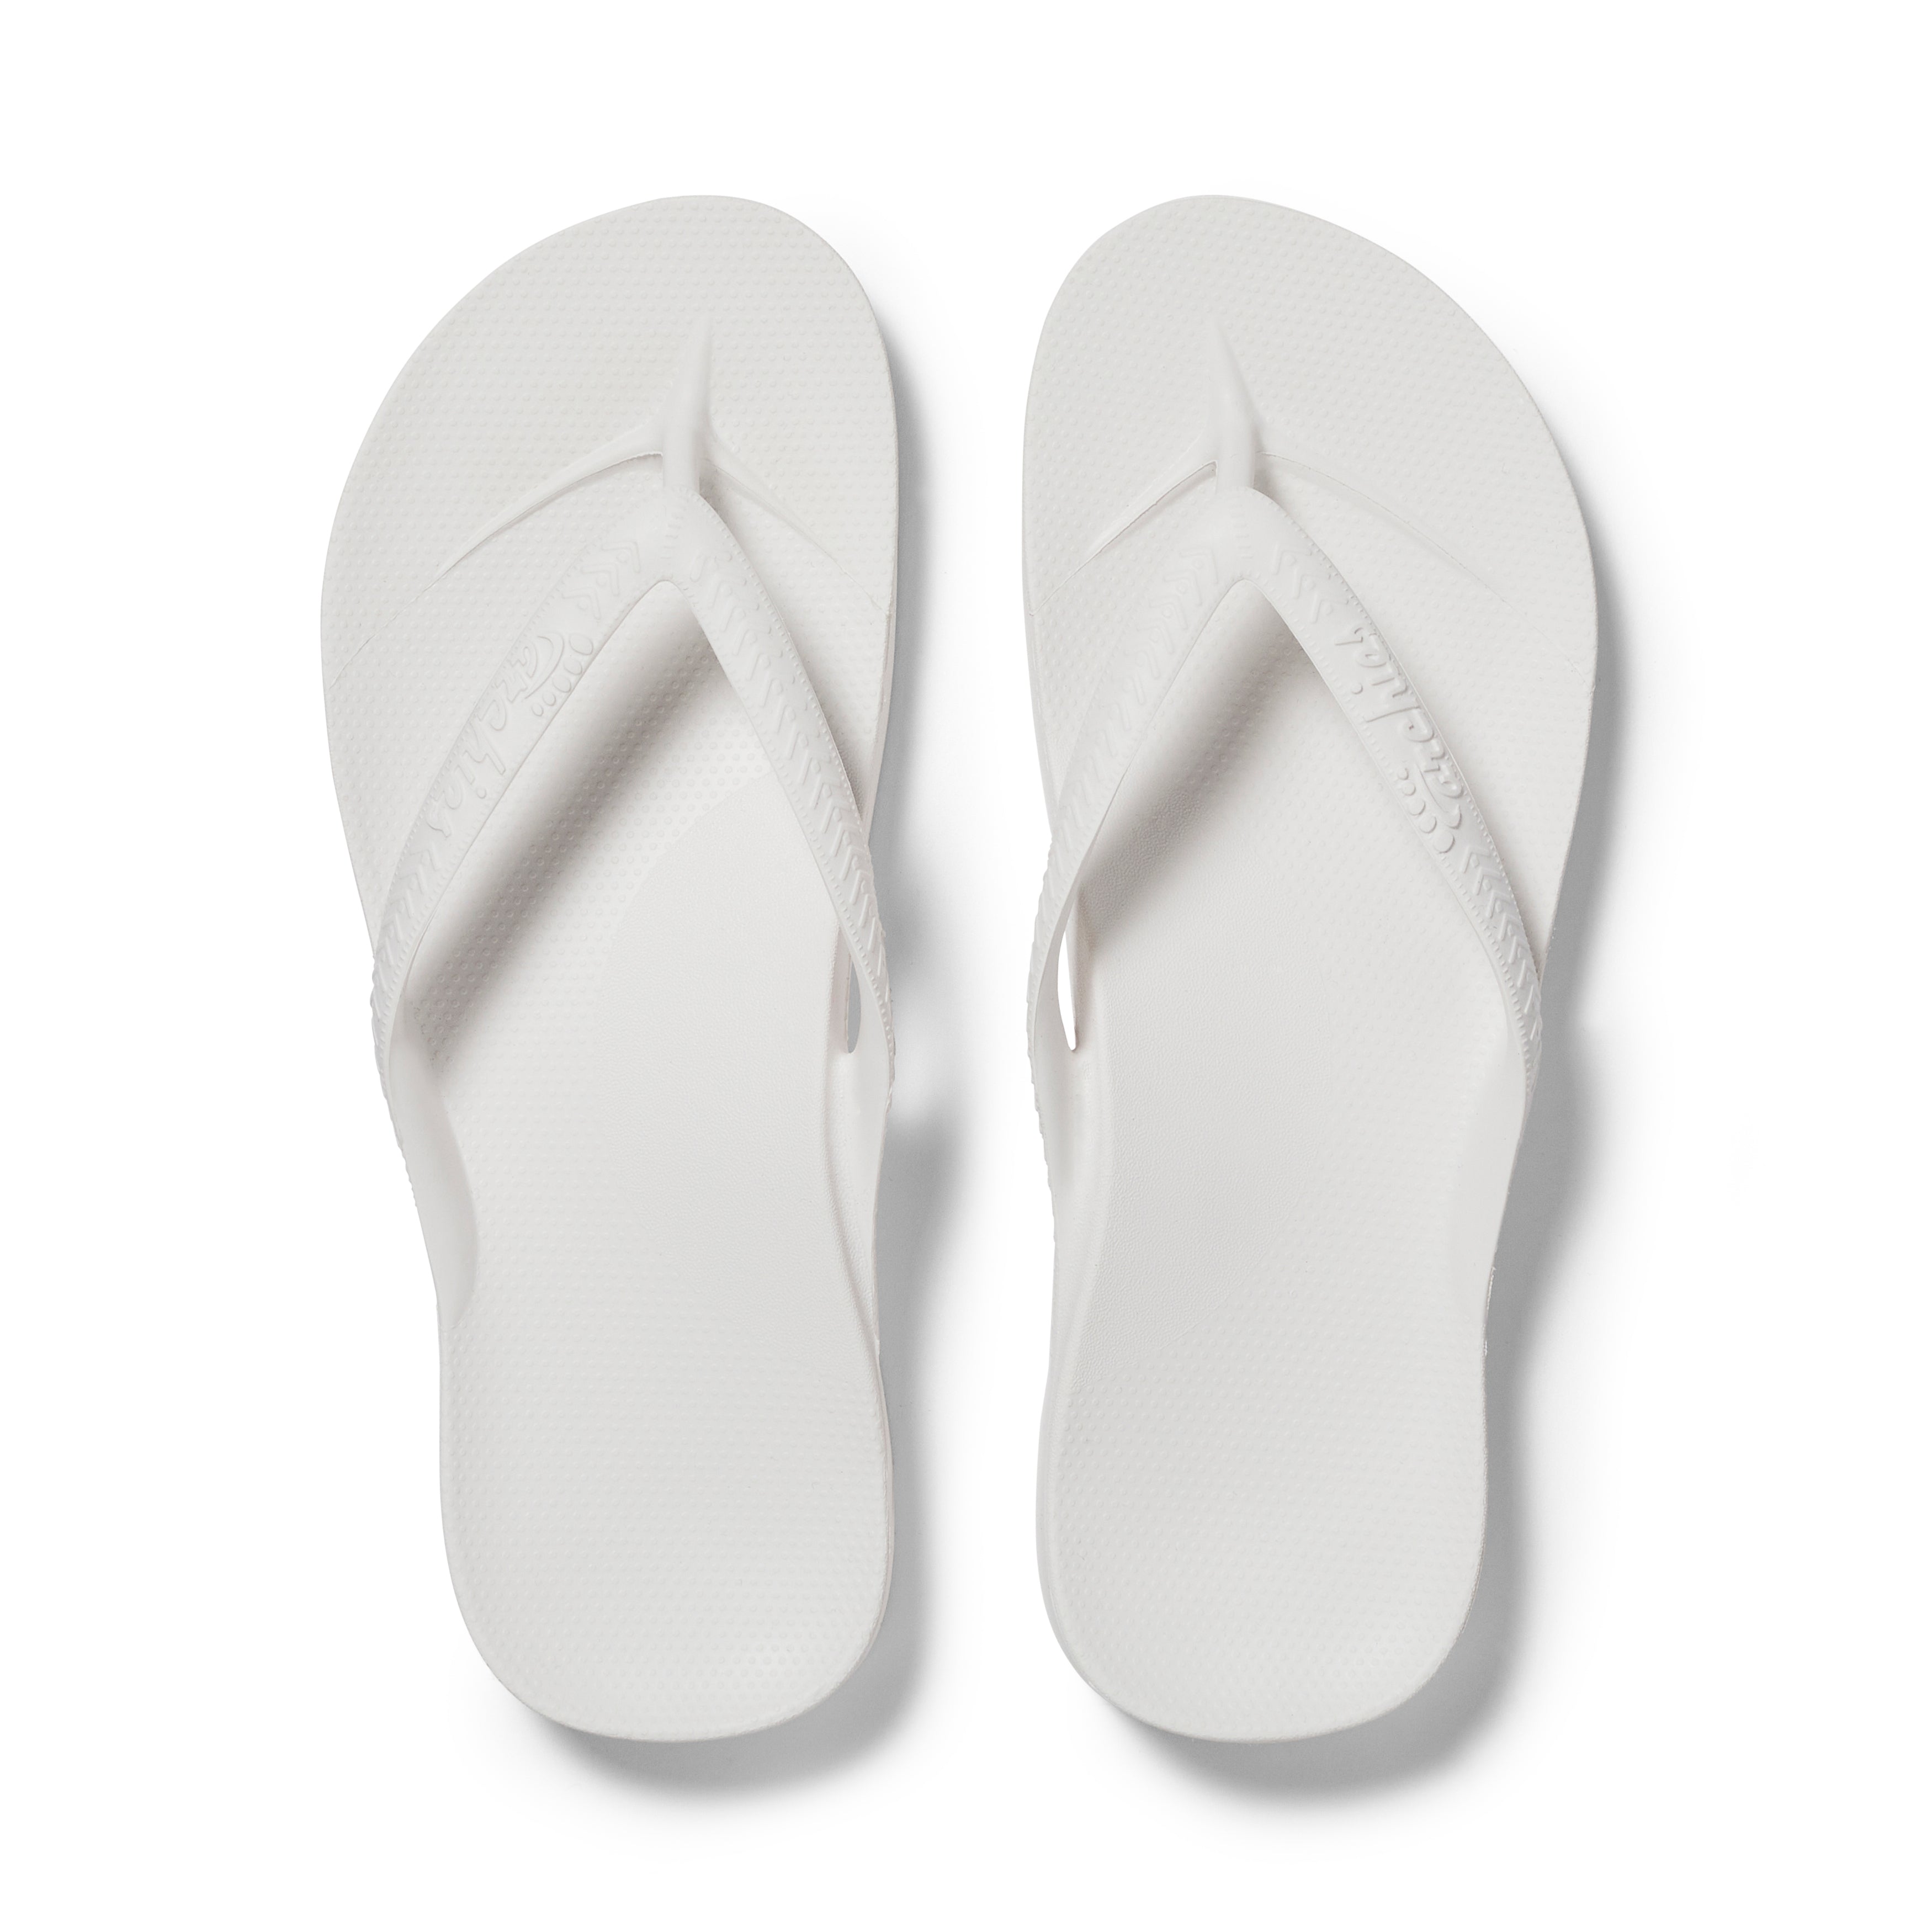 Arch Support Flip Flops - Classic - Taupe – Archies Footwear Pty Ltd.